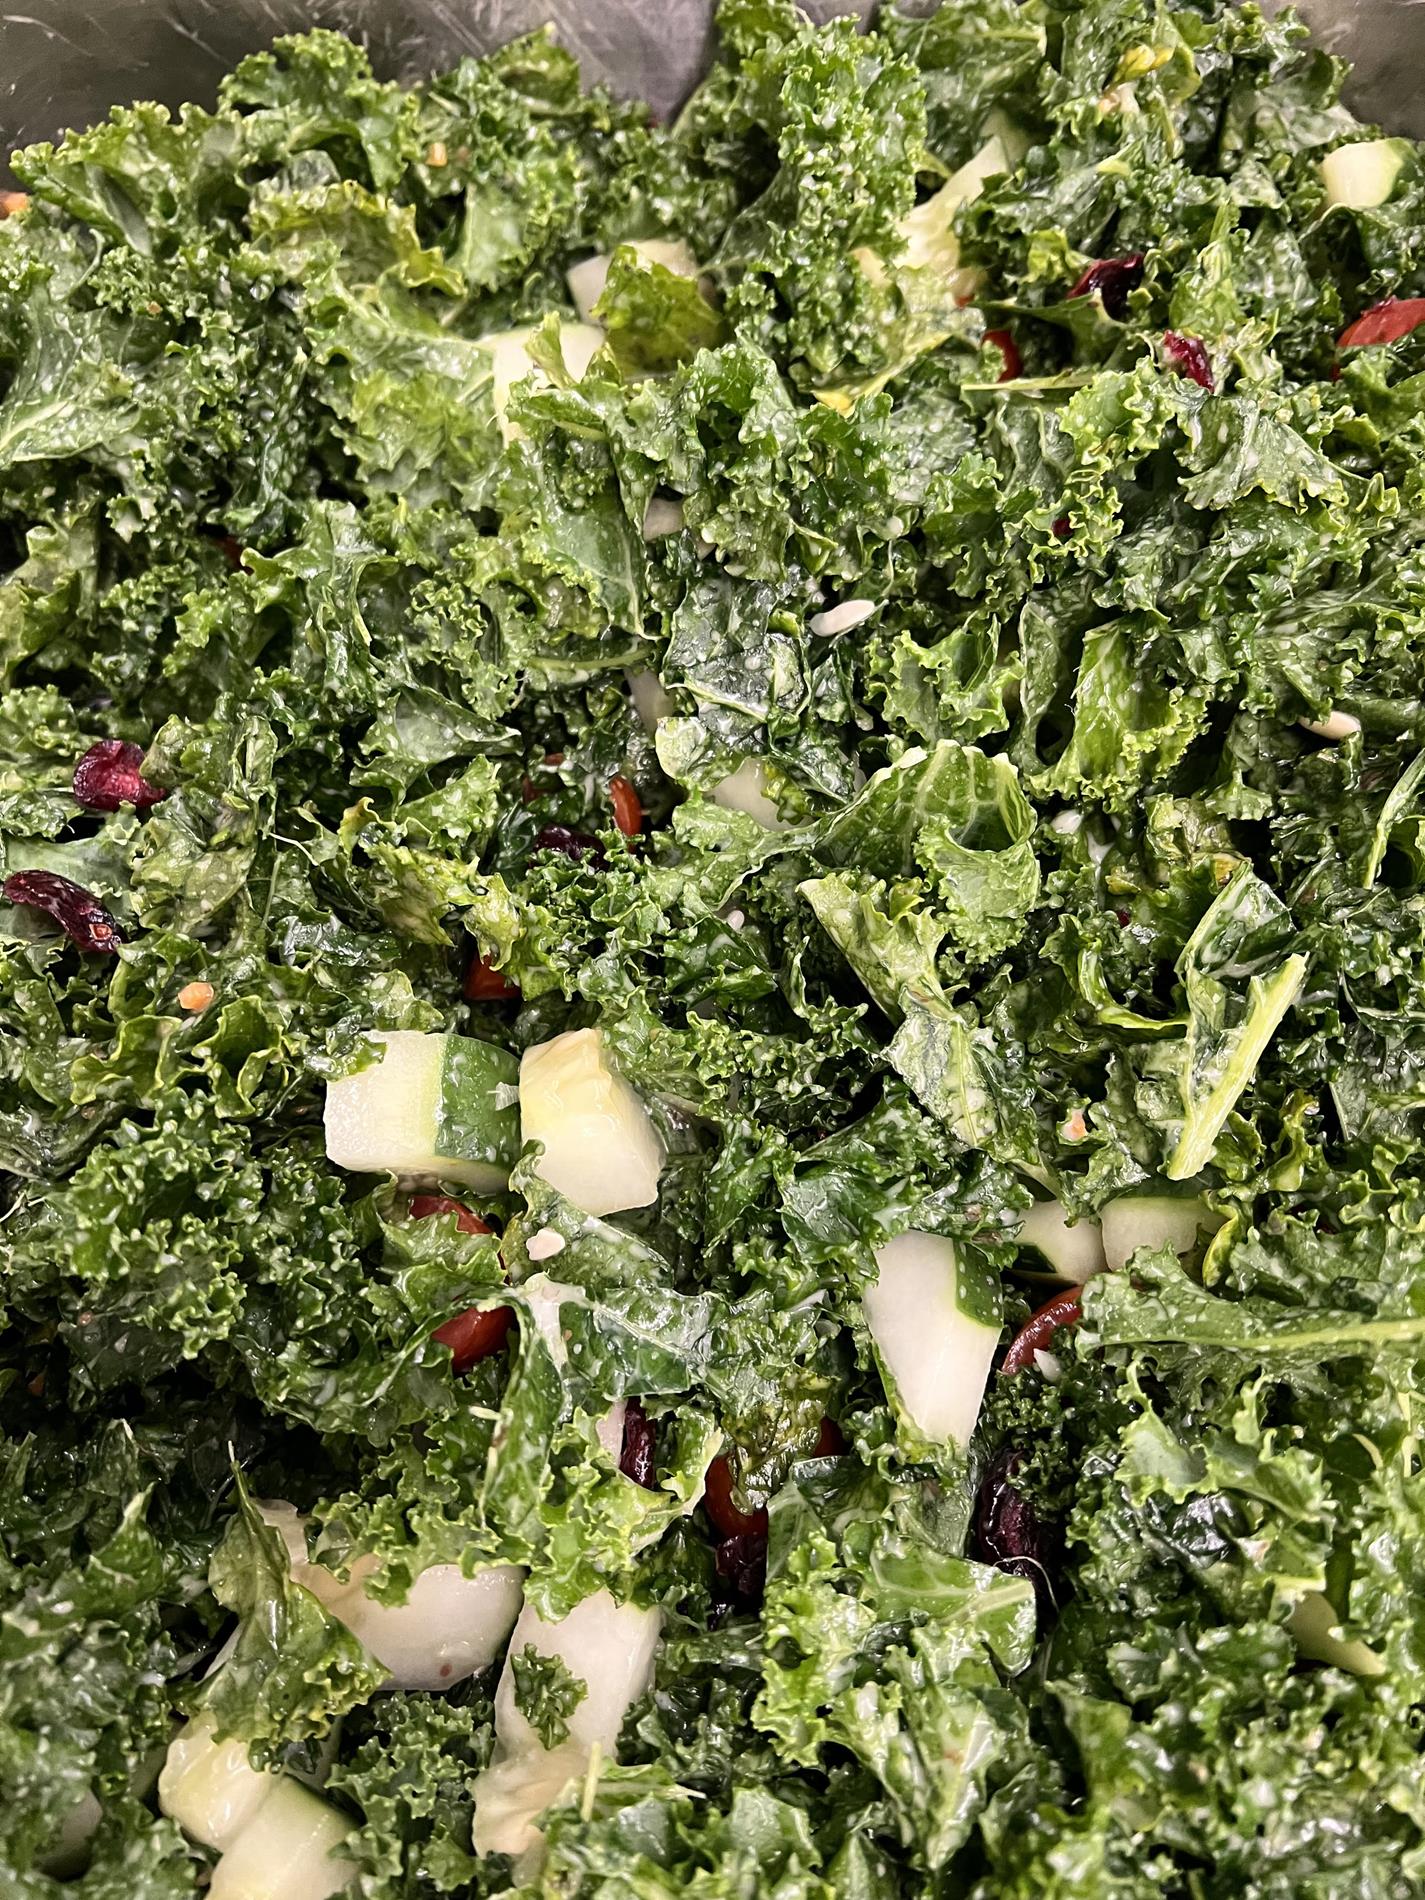 Kale salad with local kale 